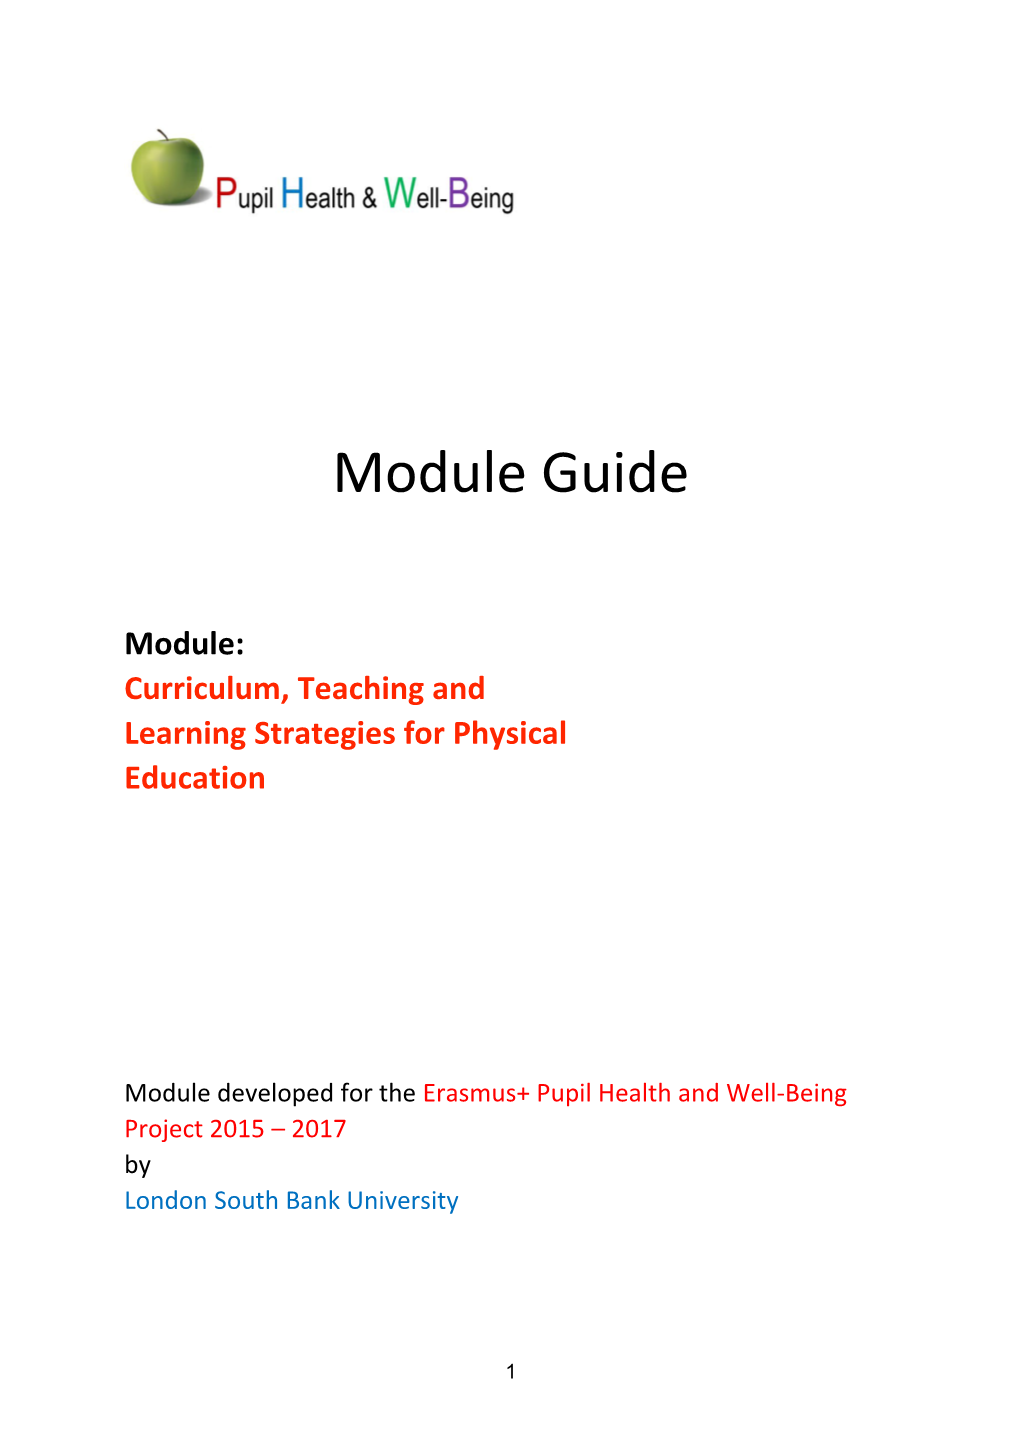 Module: Curriculum, Teaching and Learning Strategies for Physical Education